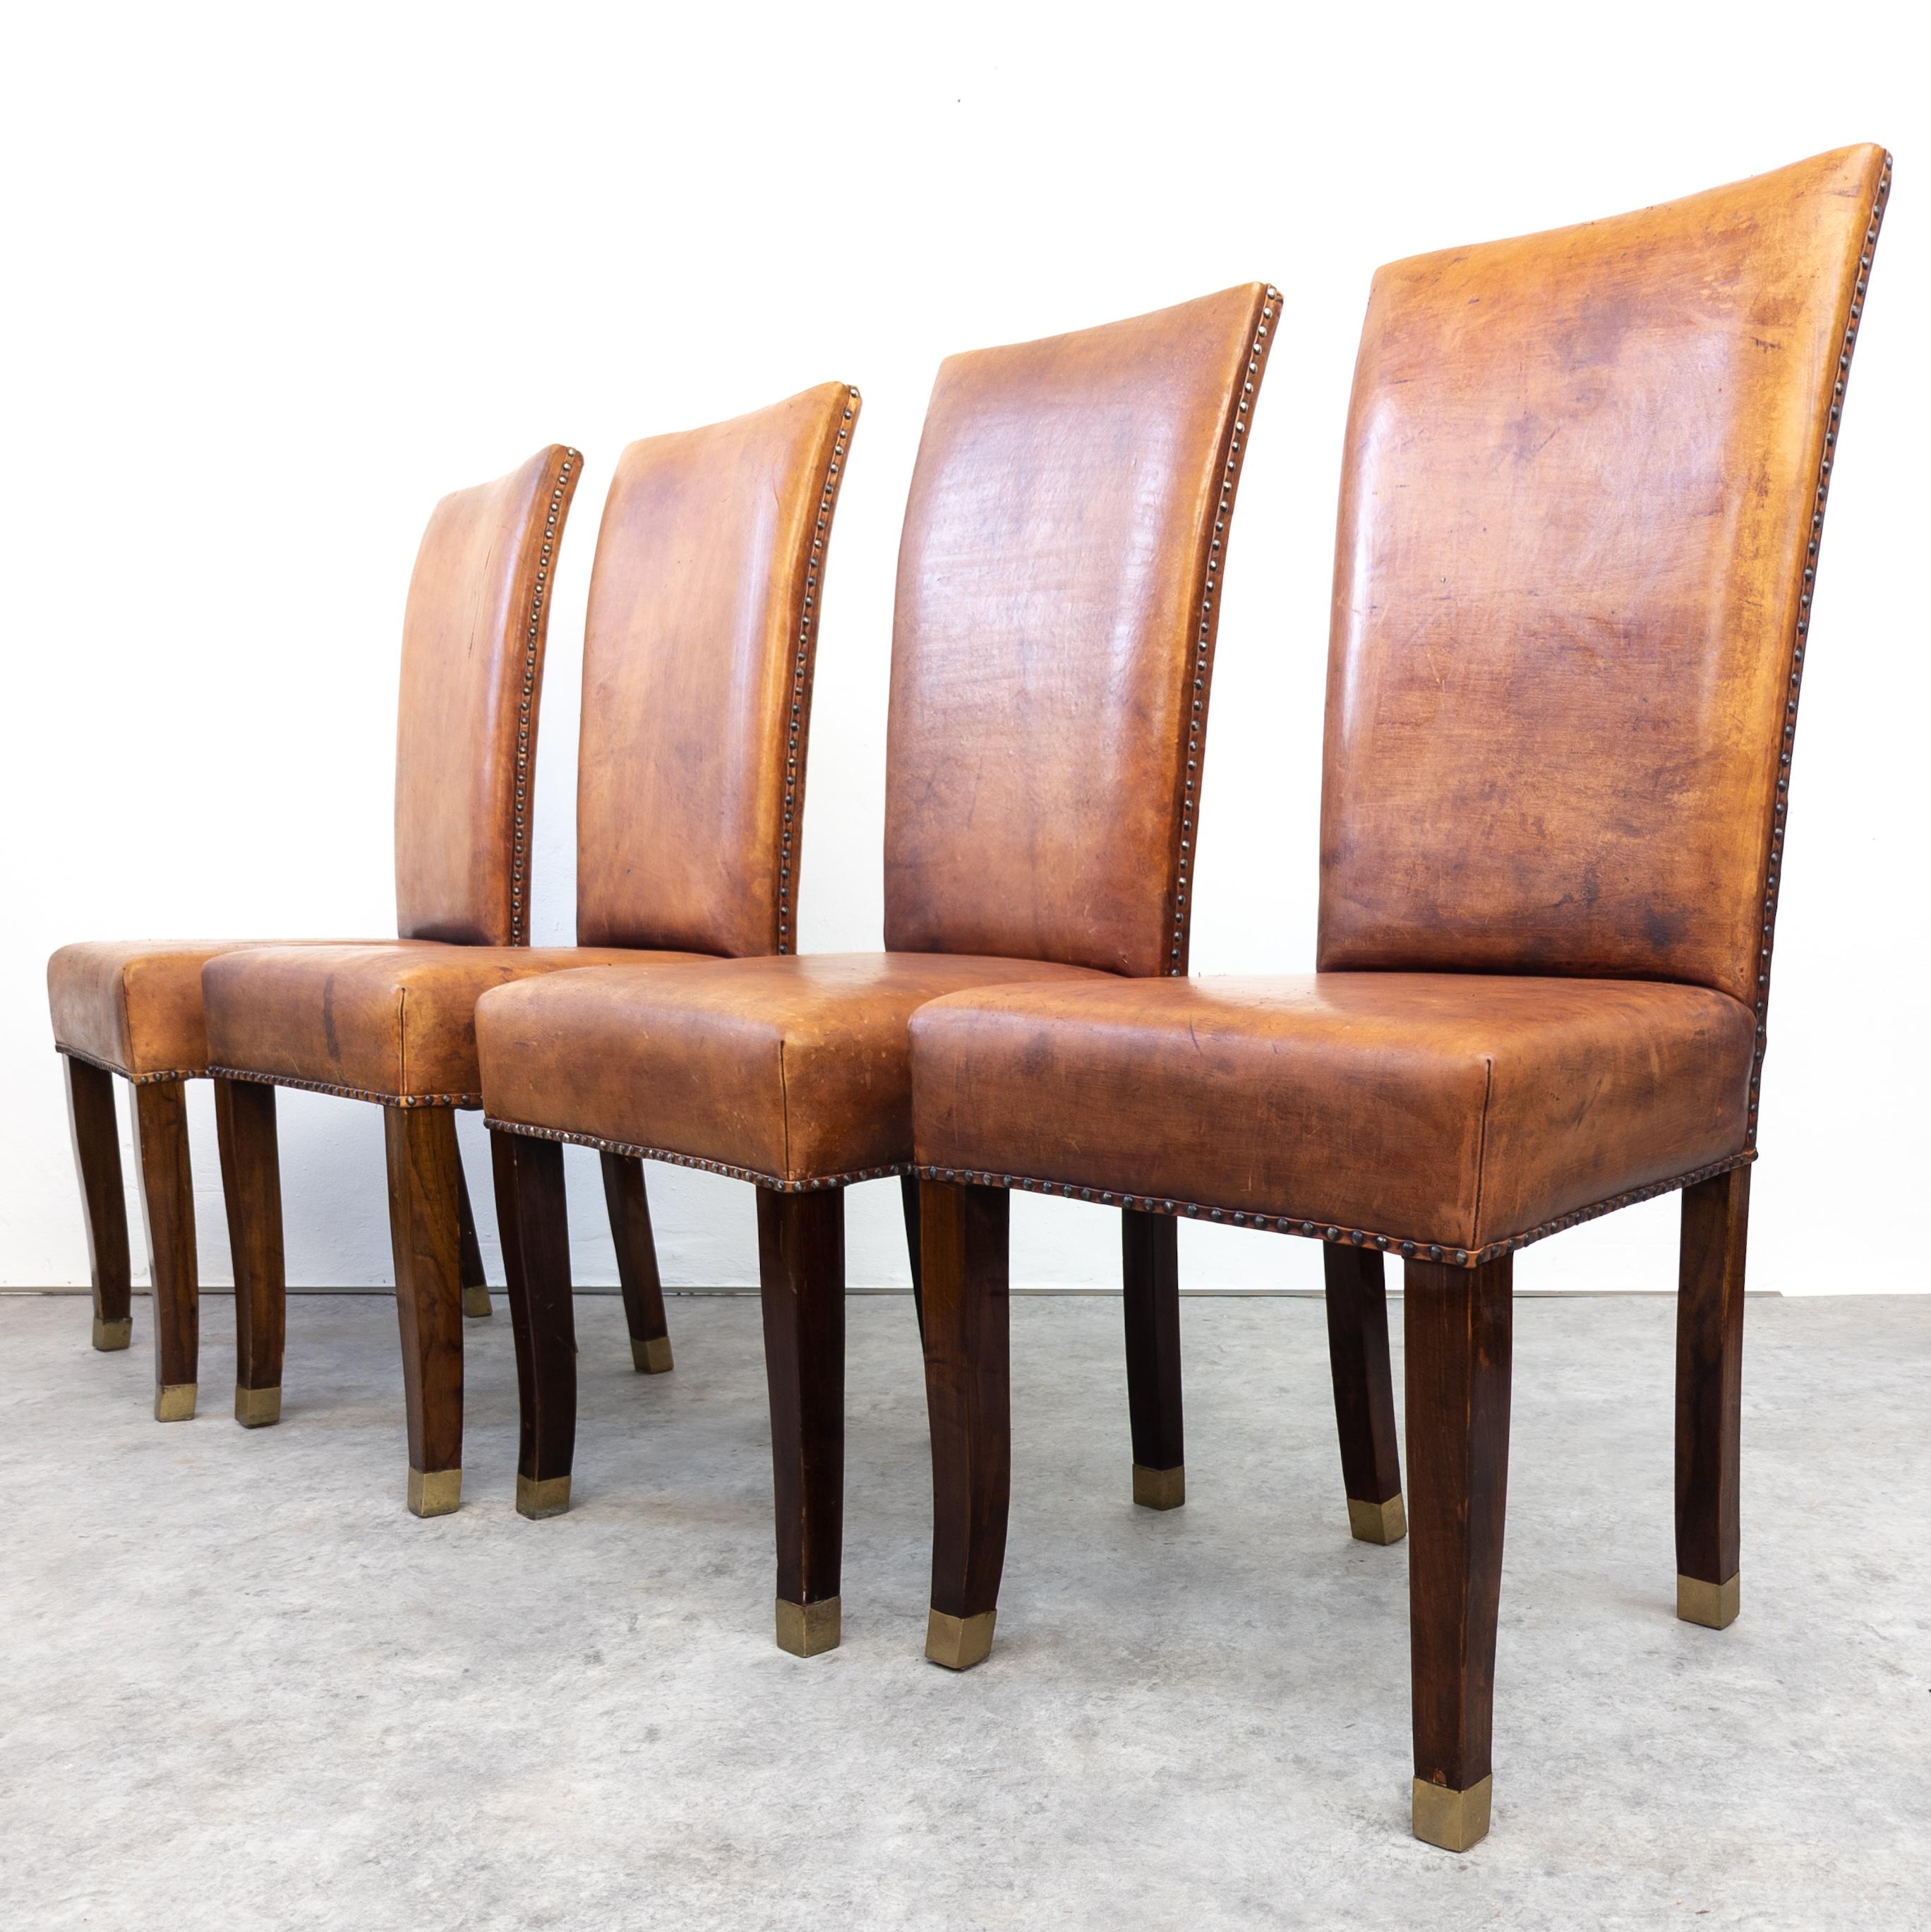 Stunning French Art Deco dining chairs. Made of solid oak and thick saddle leather, with brass fittings. Chairs are firm and steady. Strong patina on the leather with some scratches. In overall good vintage condition. Wear consistent with age and